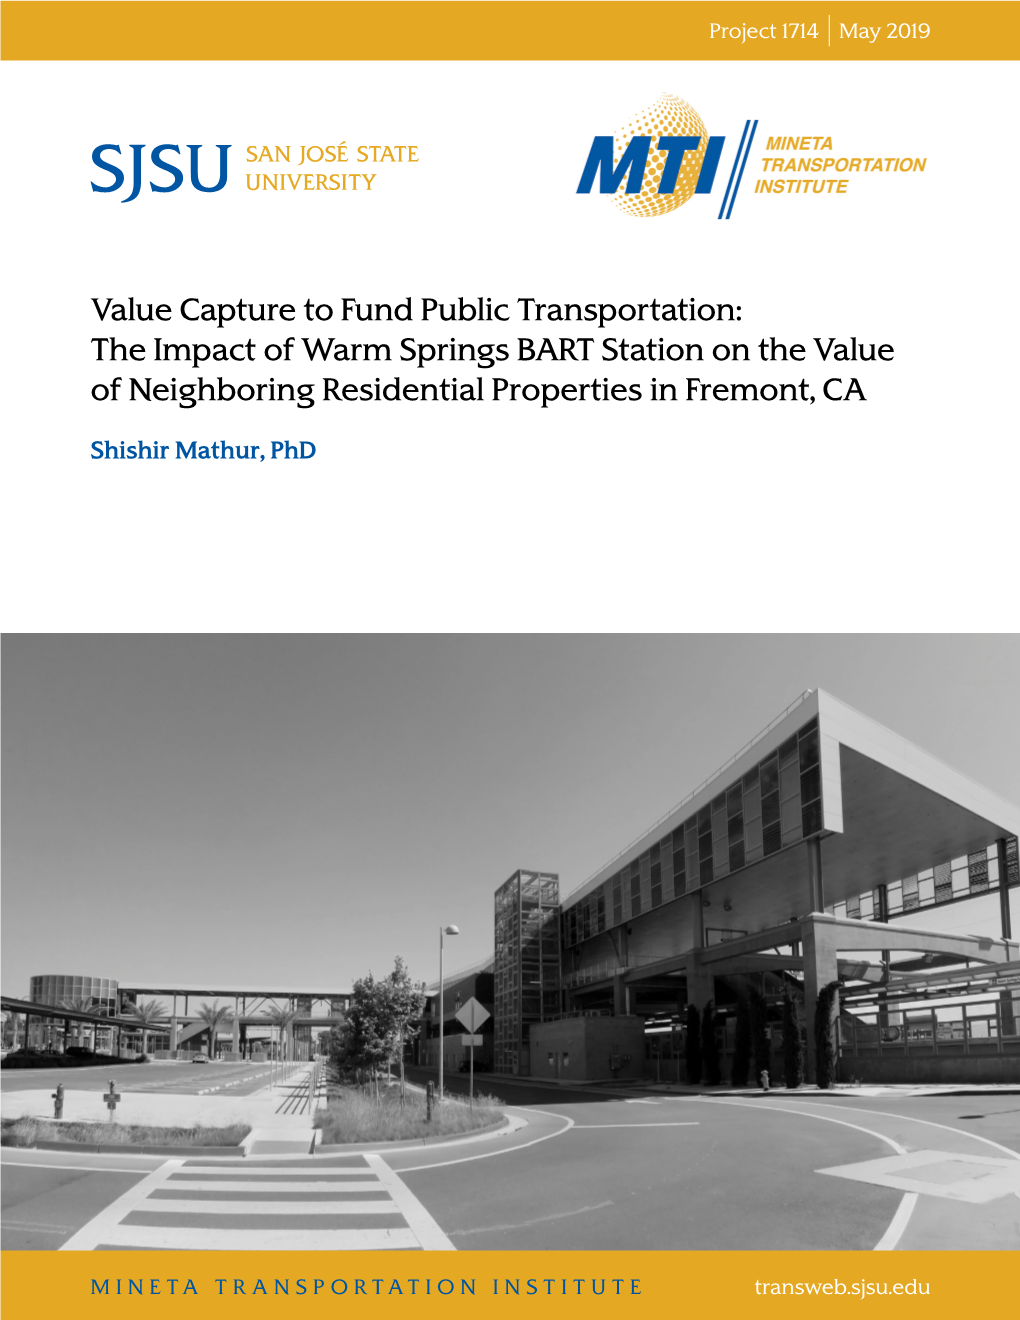 Value Capture to Fund Public Transportation: the Impact of Warm Springs BART Station on the Value of Neighboring Residential Properties in Fremont, CA